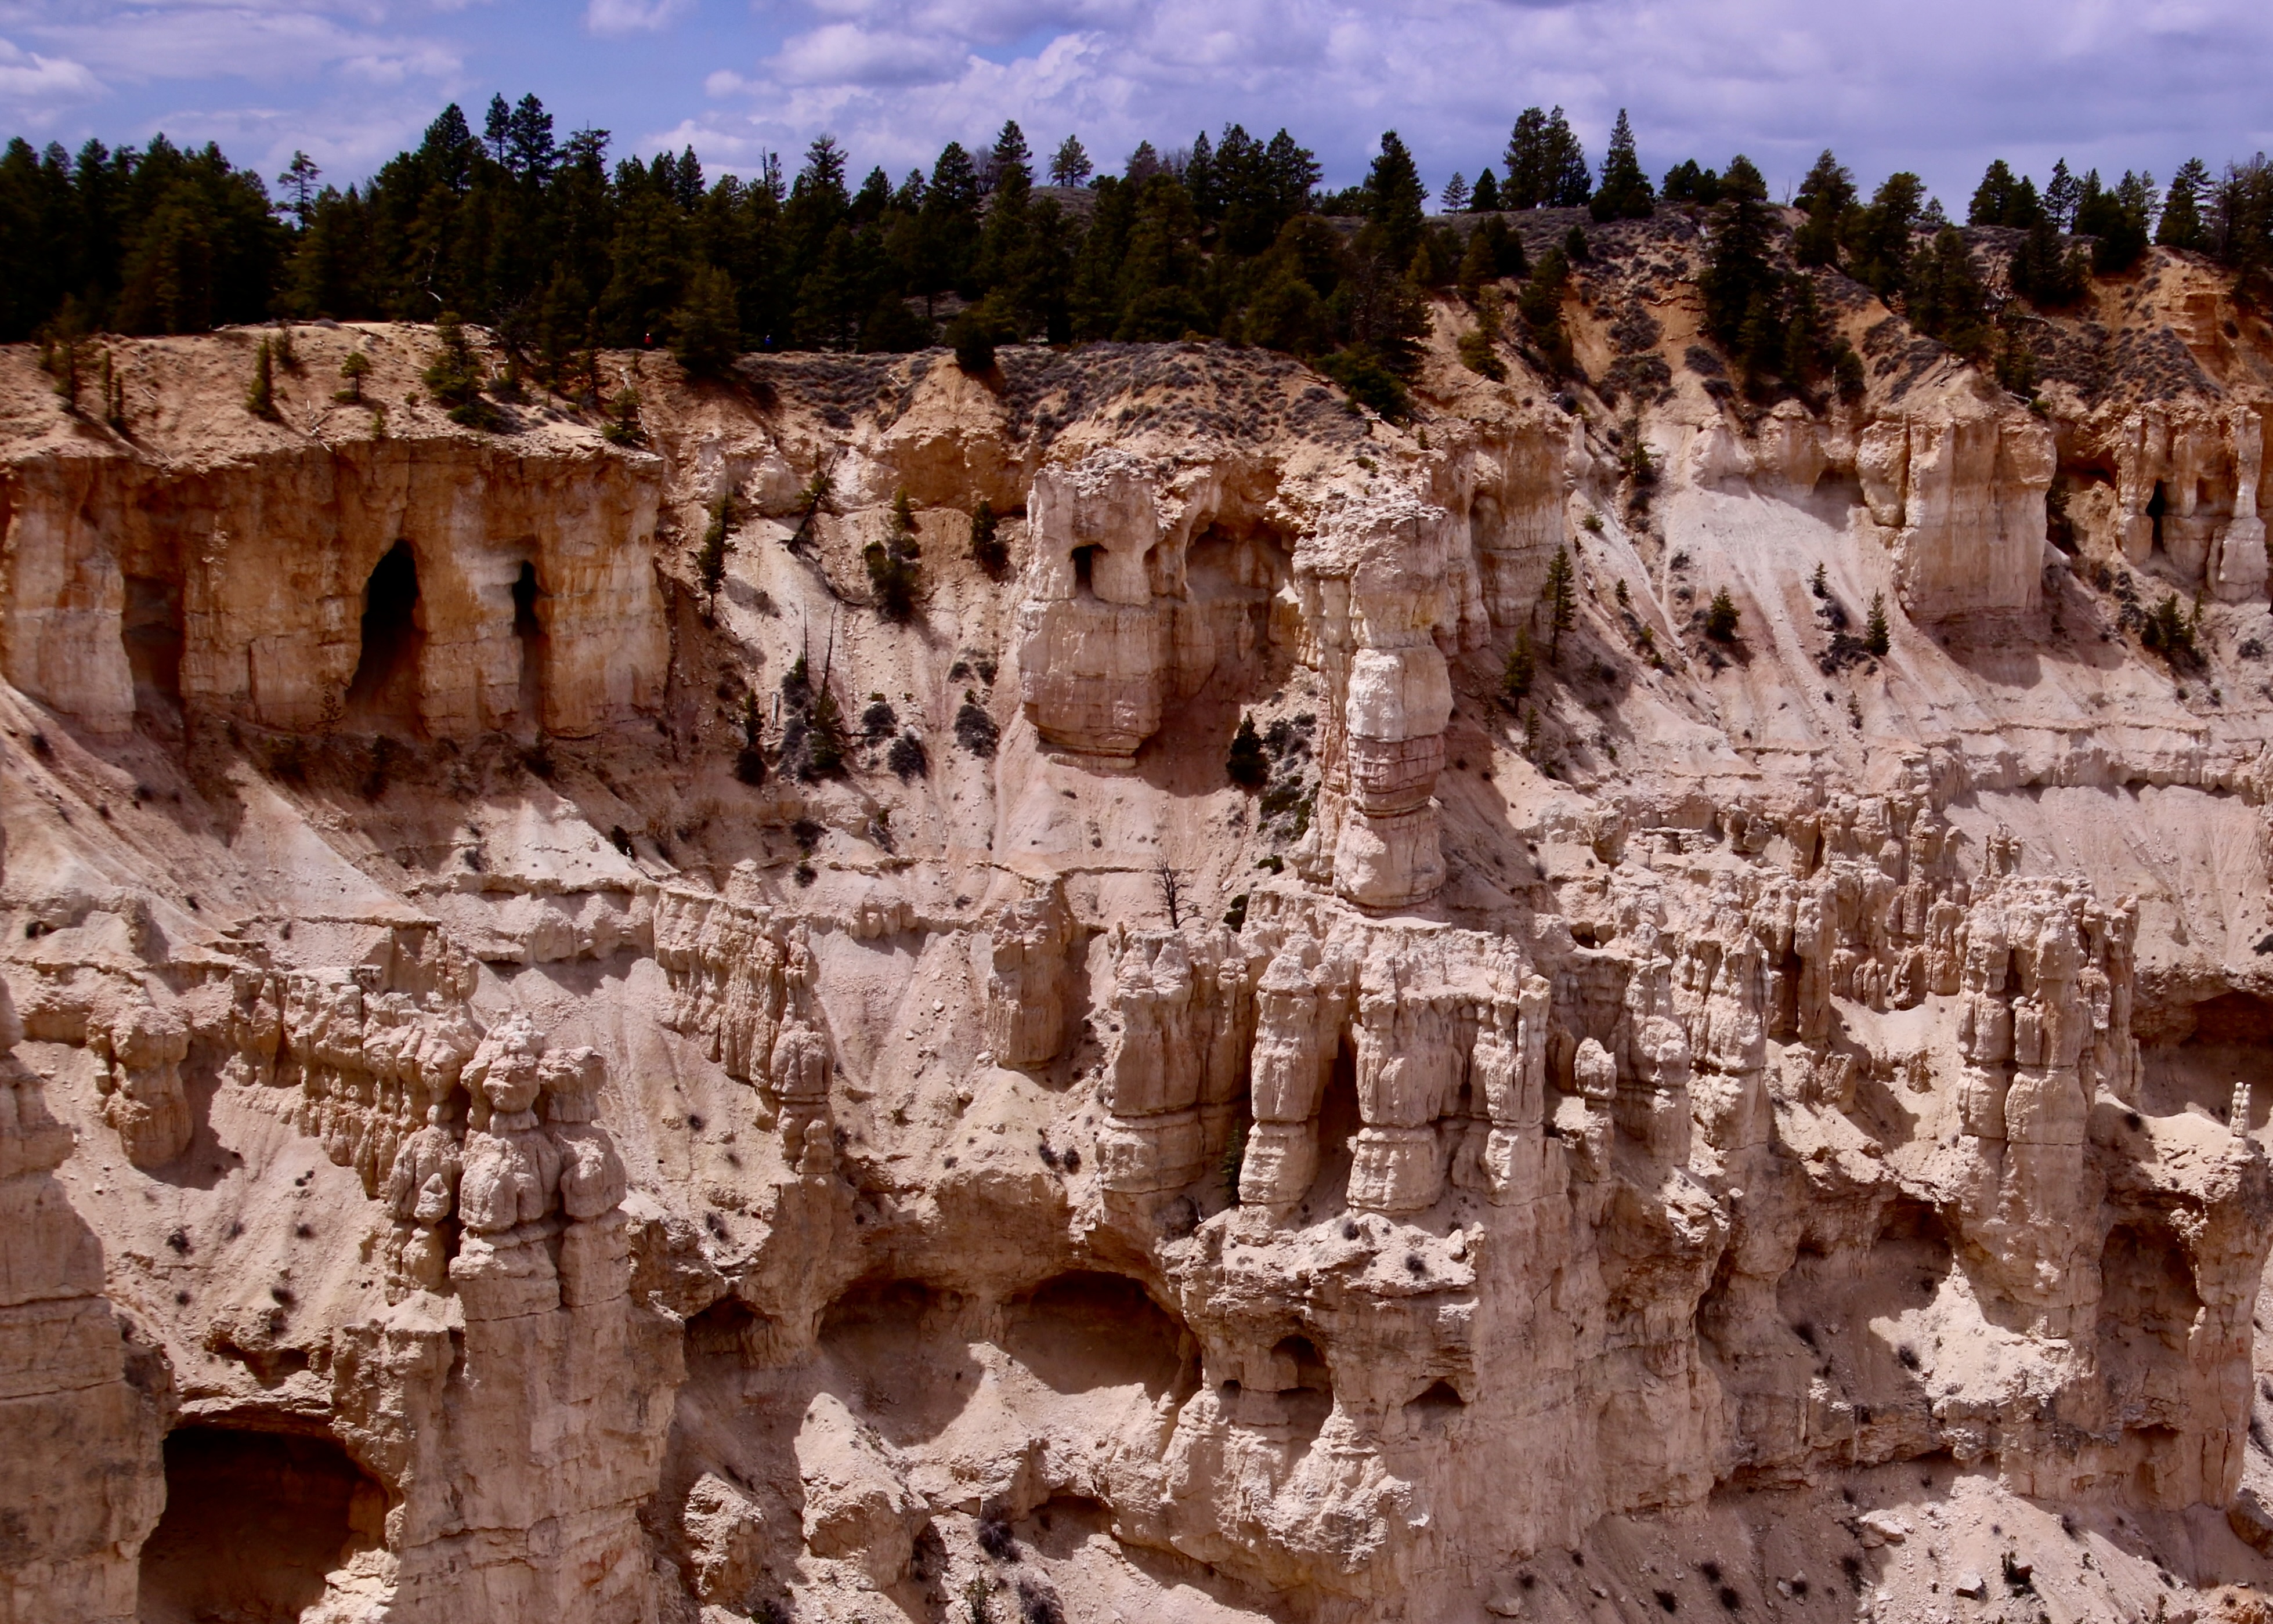 Eroded structures on the sides of Bryce Canyon National Park. Photo by Peggy Mekemson.